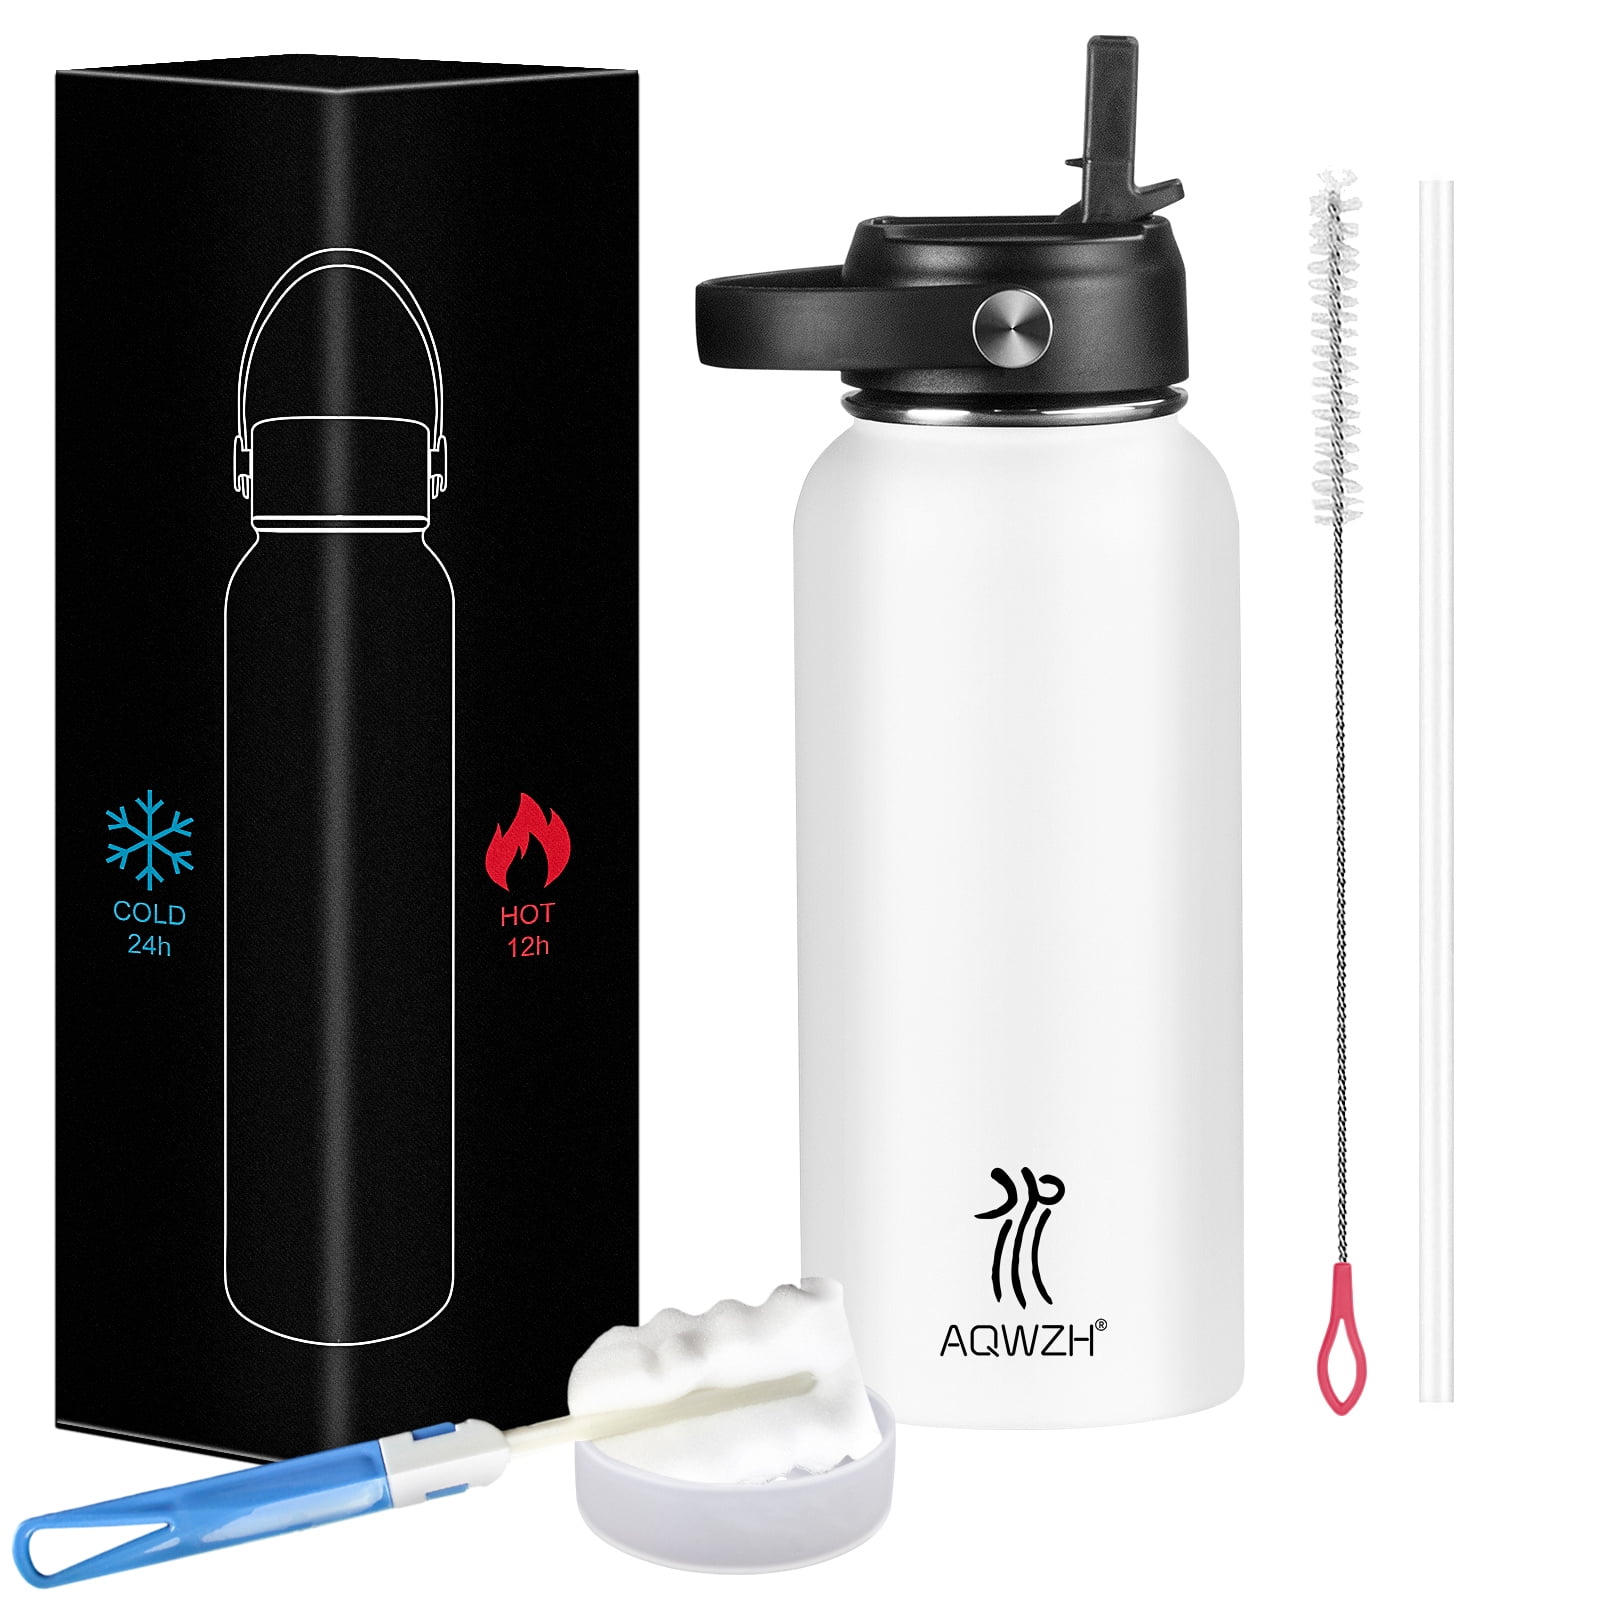 Hydro Flask 40 OZ Wide-Mouth White Water Bottle